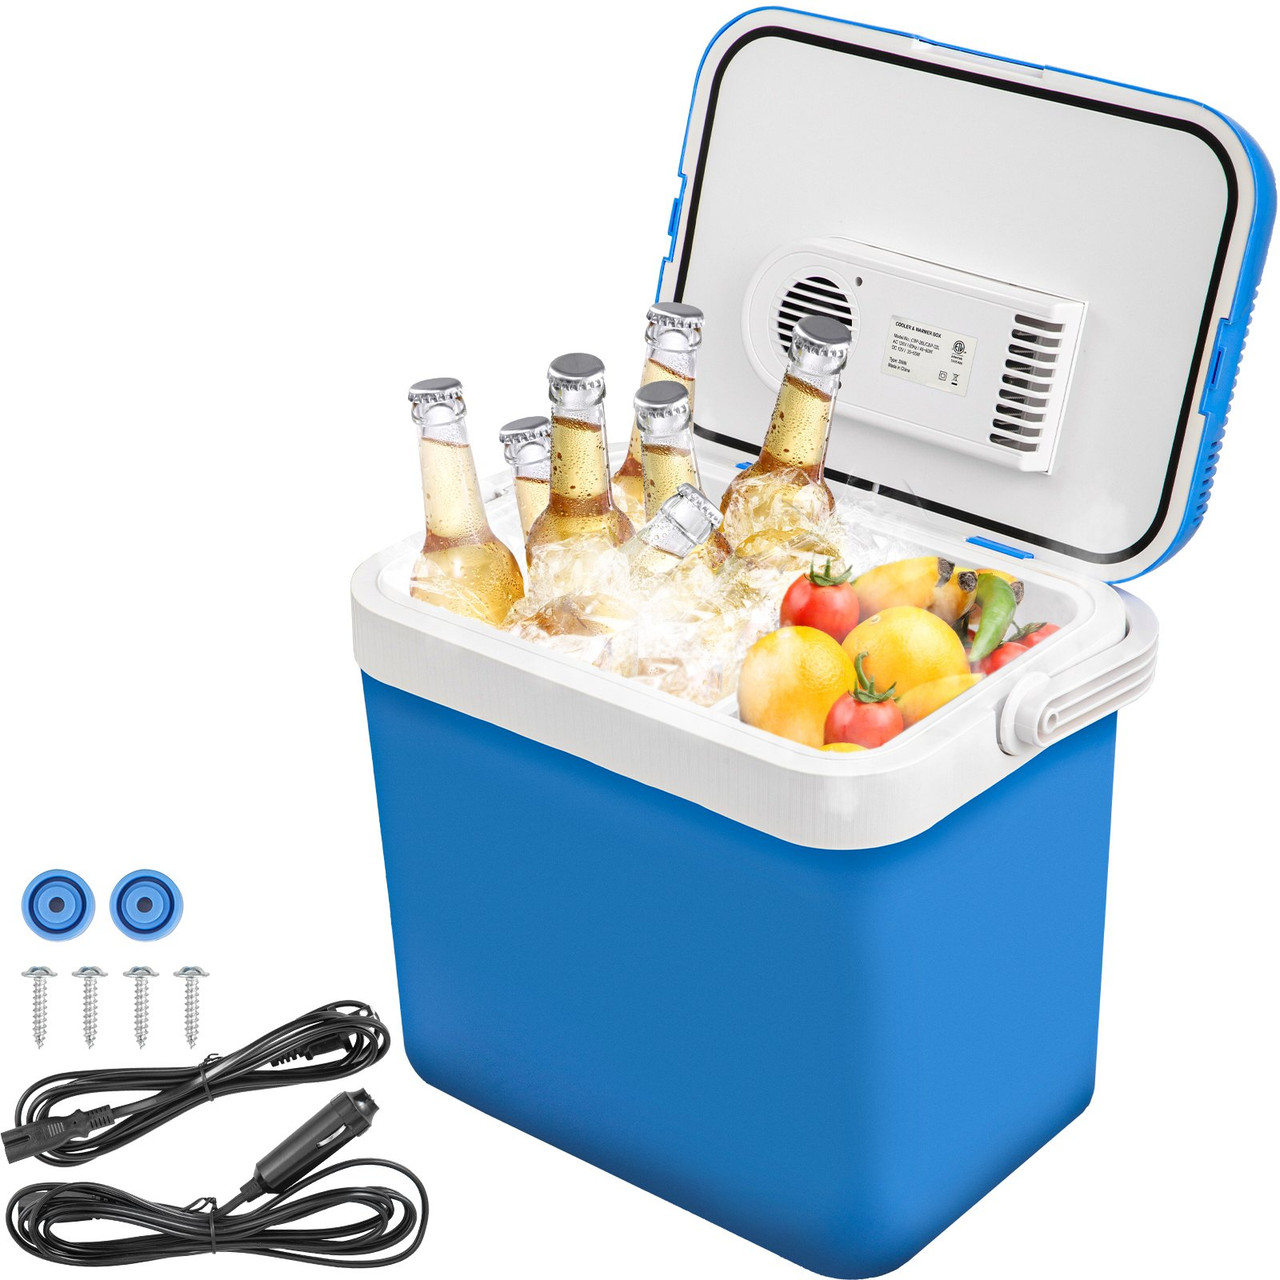 VEVOR Electric Cooler and Warmer 34 Quart Portable Thermoelectric Fridge Plug in Refrigerator with Collapsible Handle 110V AC Home Power Cord & 12V